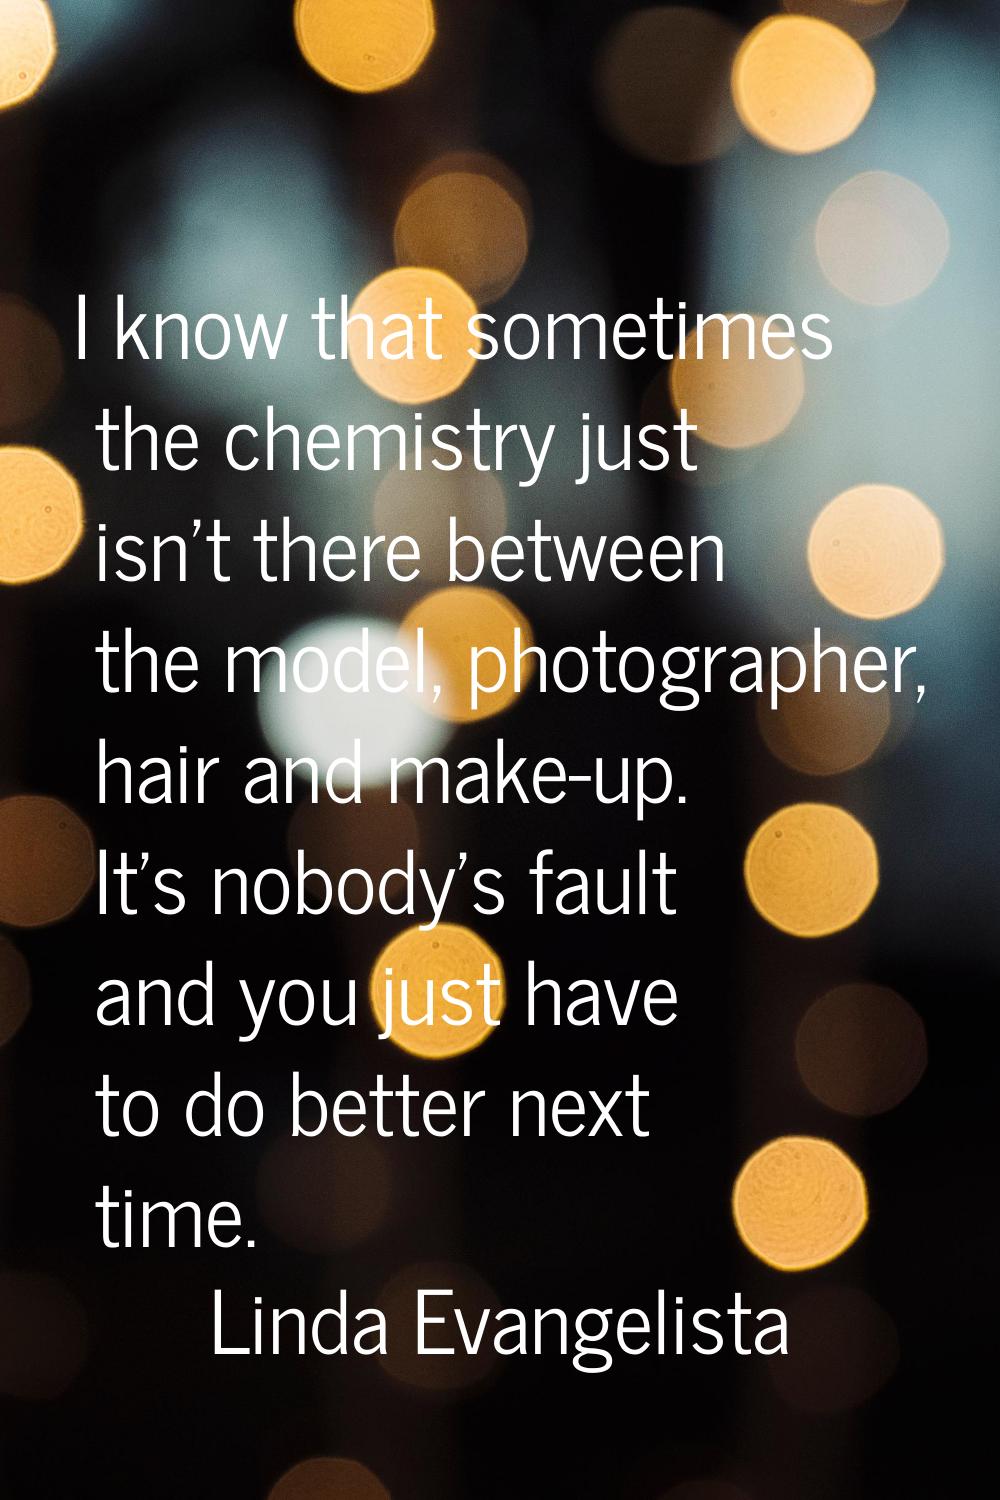 I know that sometimes the chemistry just isn't there between the model, photographer, hair and make